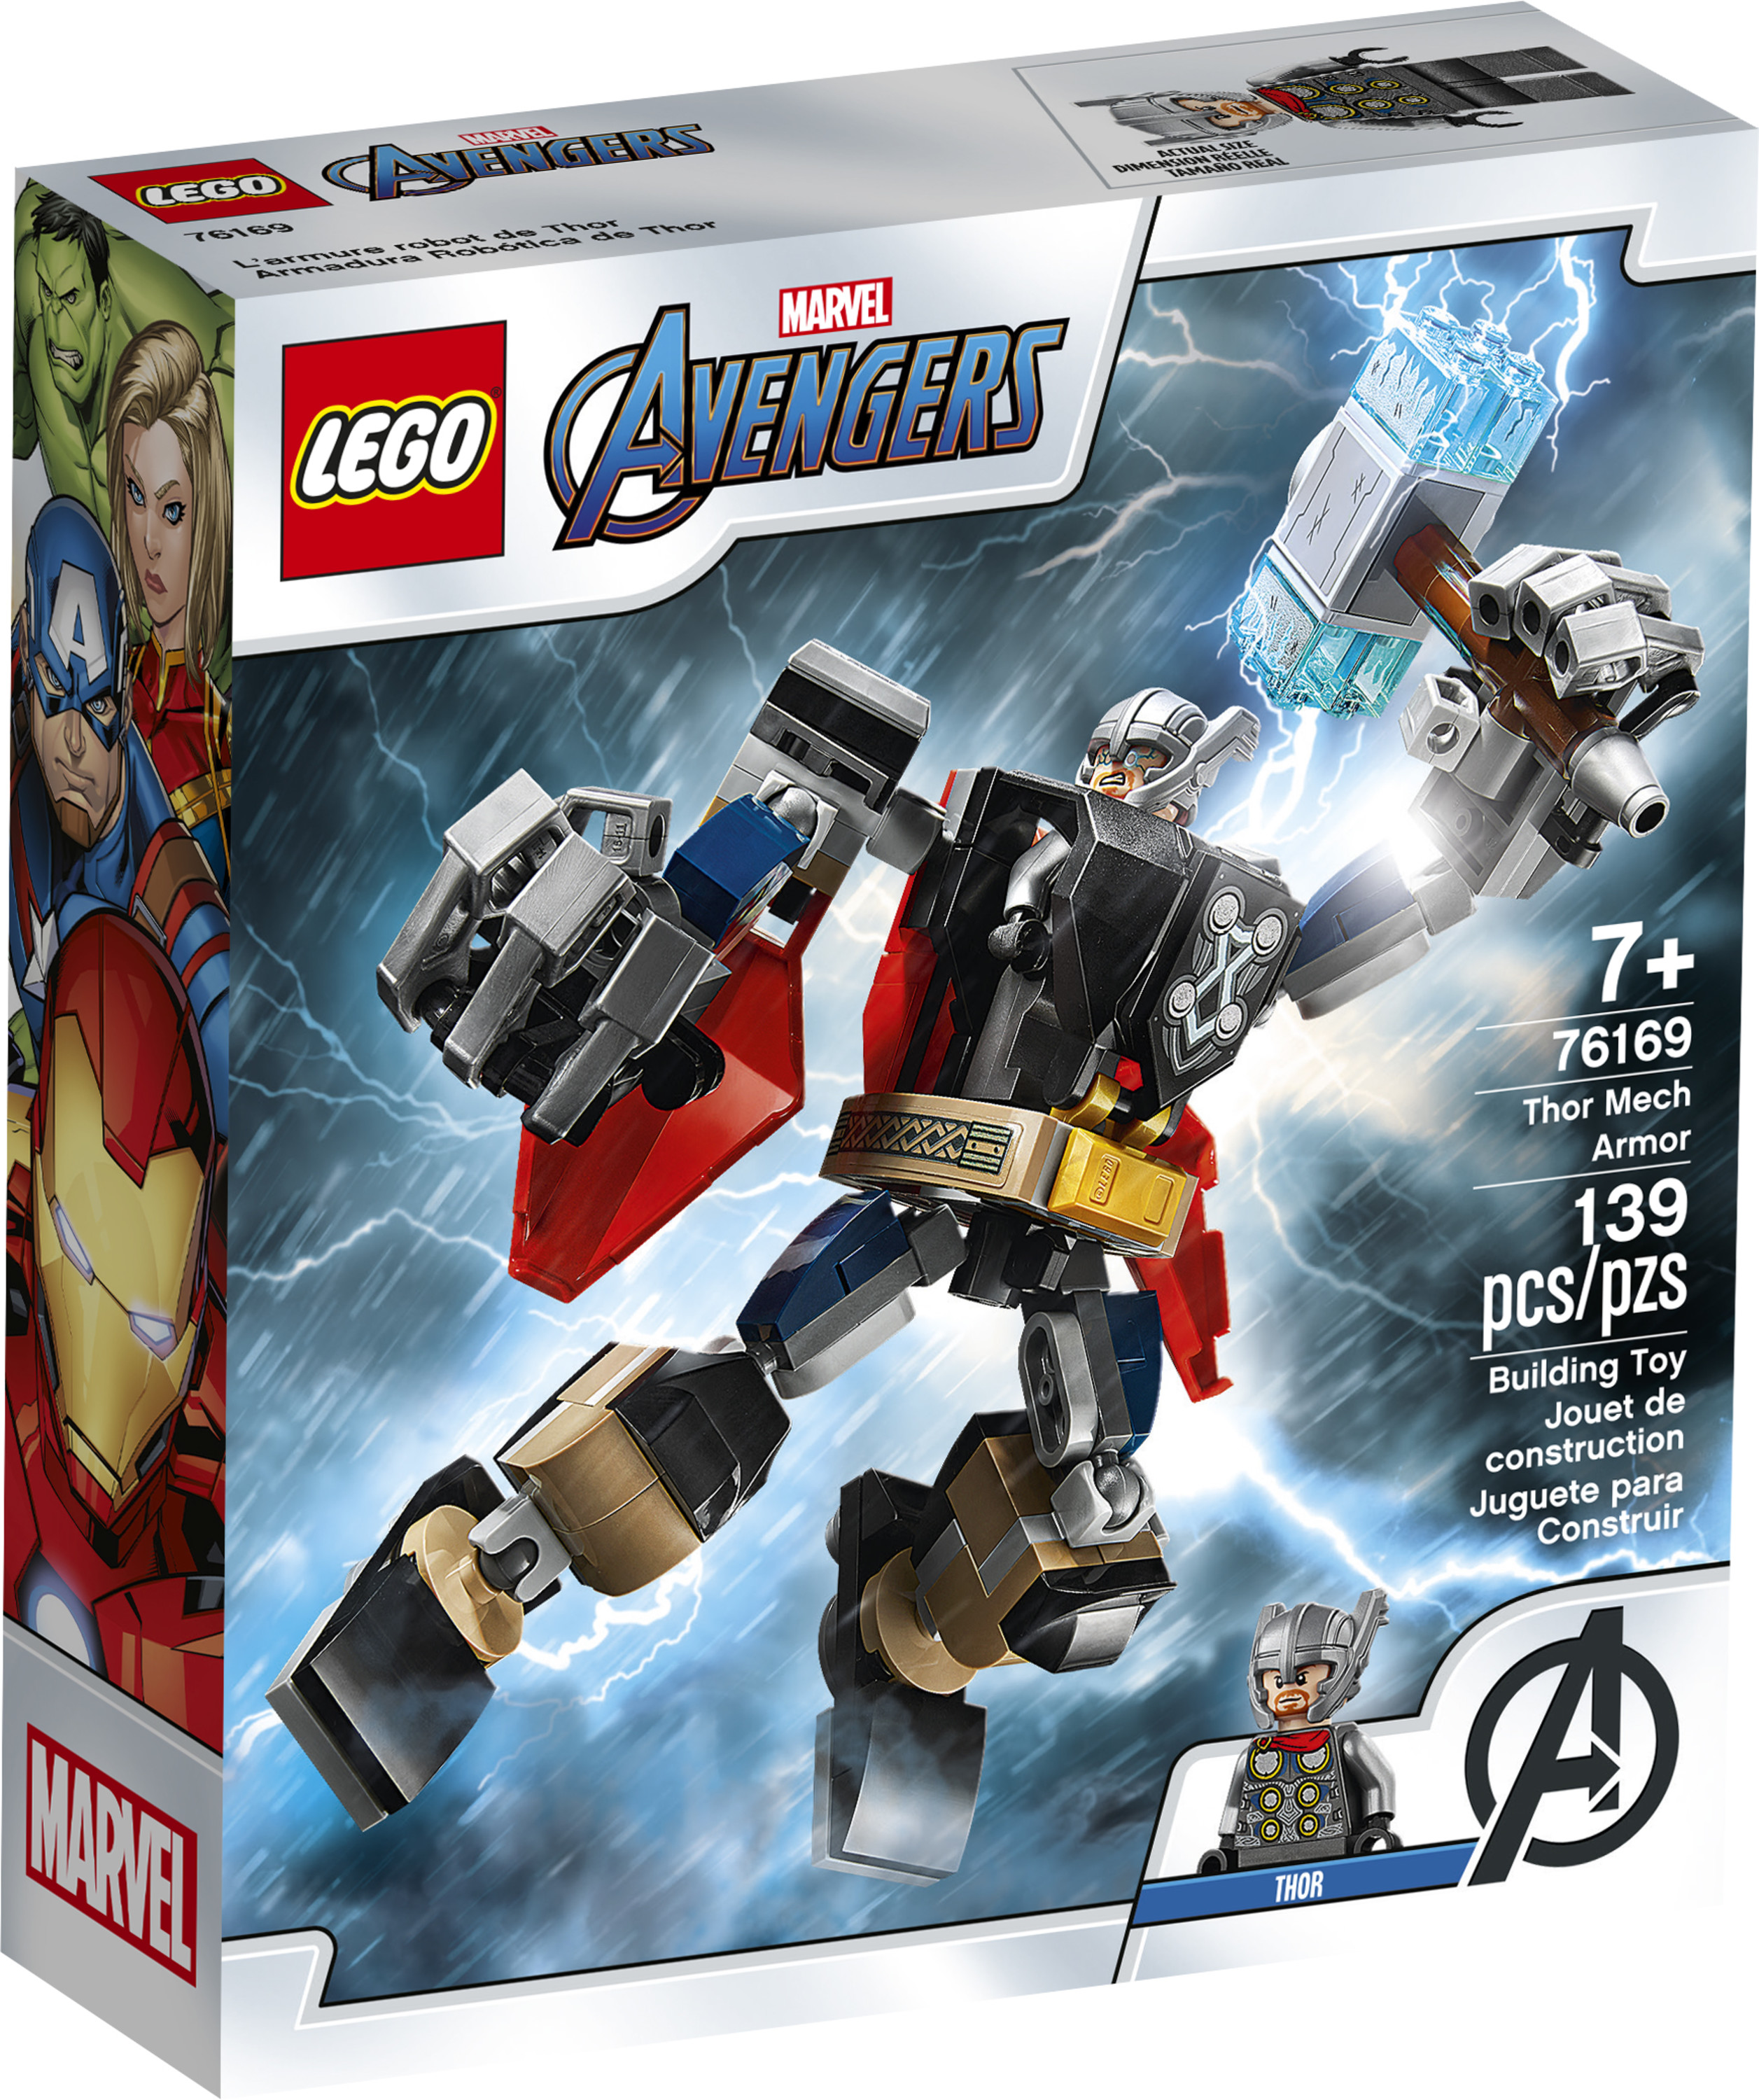 LEGO Marvel Avengers Classic Thor Mech Armor 76169 Cool Thor Hammer Playset (139 Pieces) - image 5 of 8